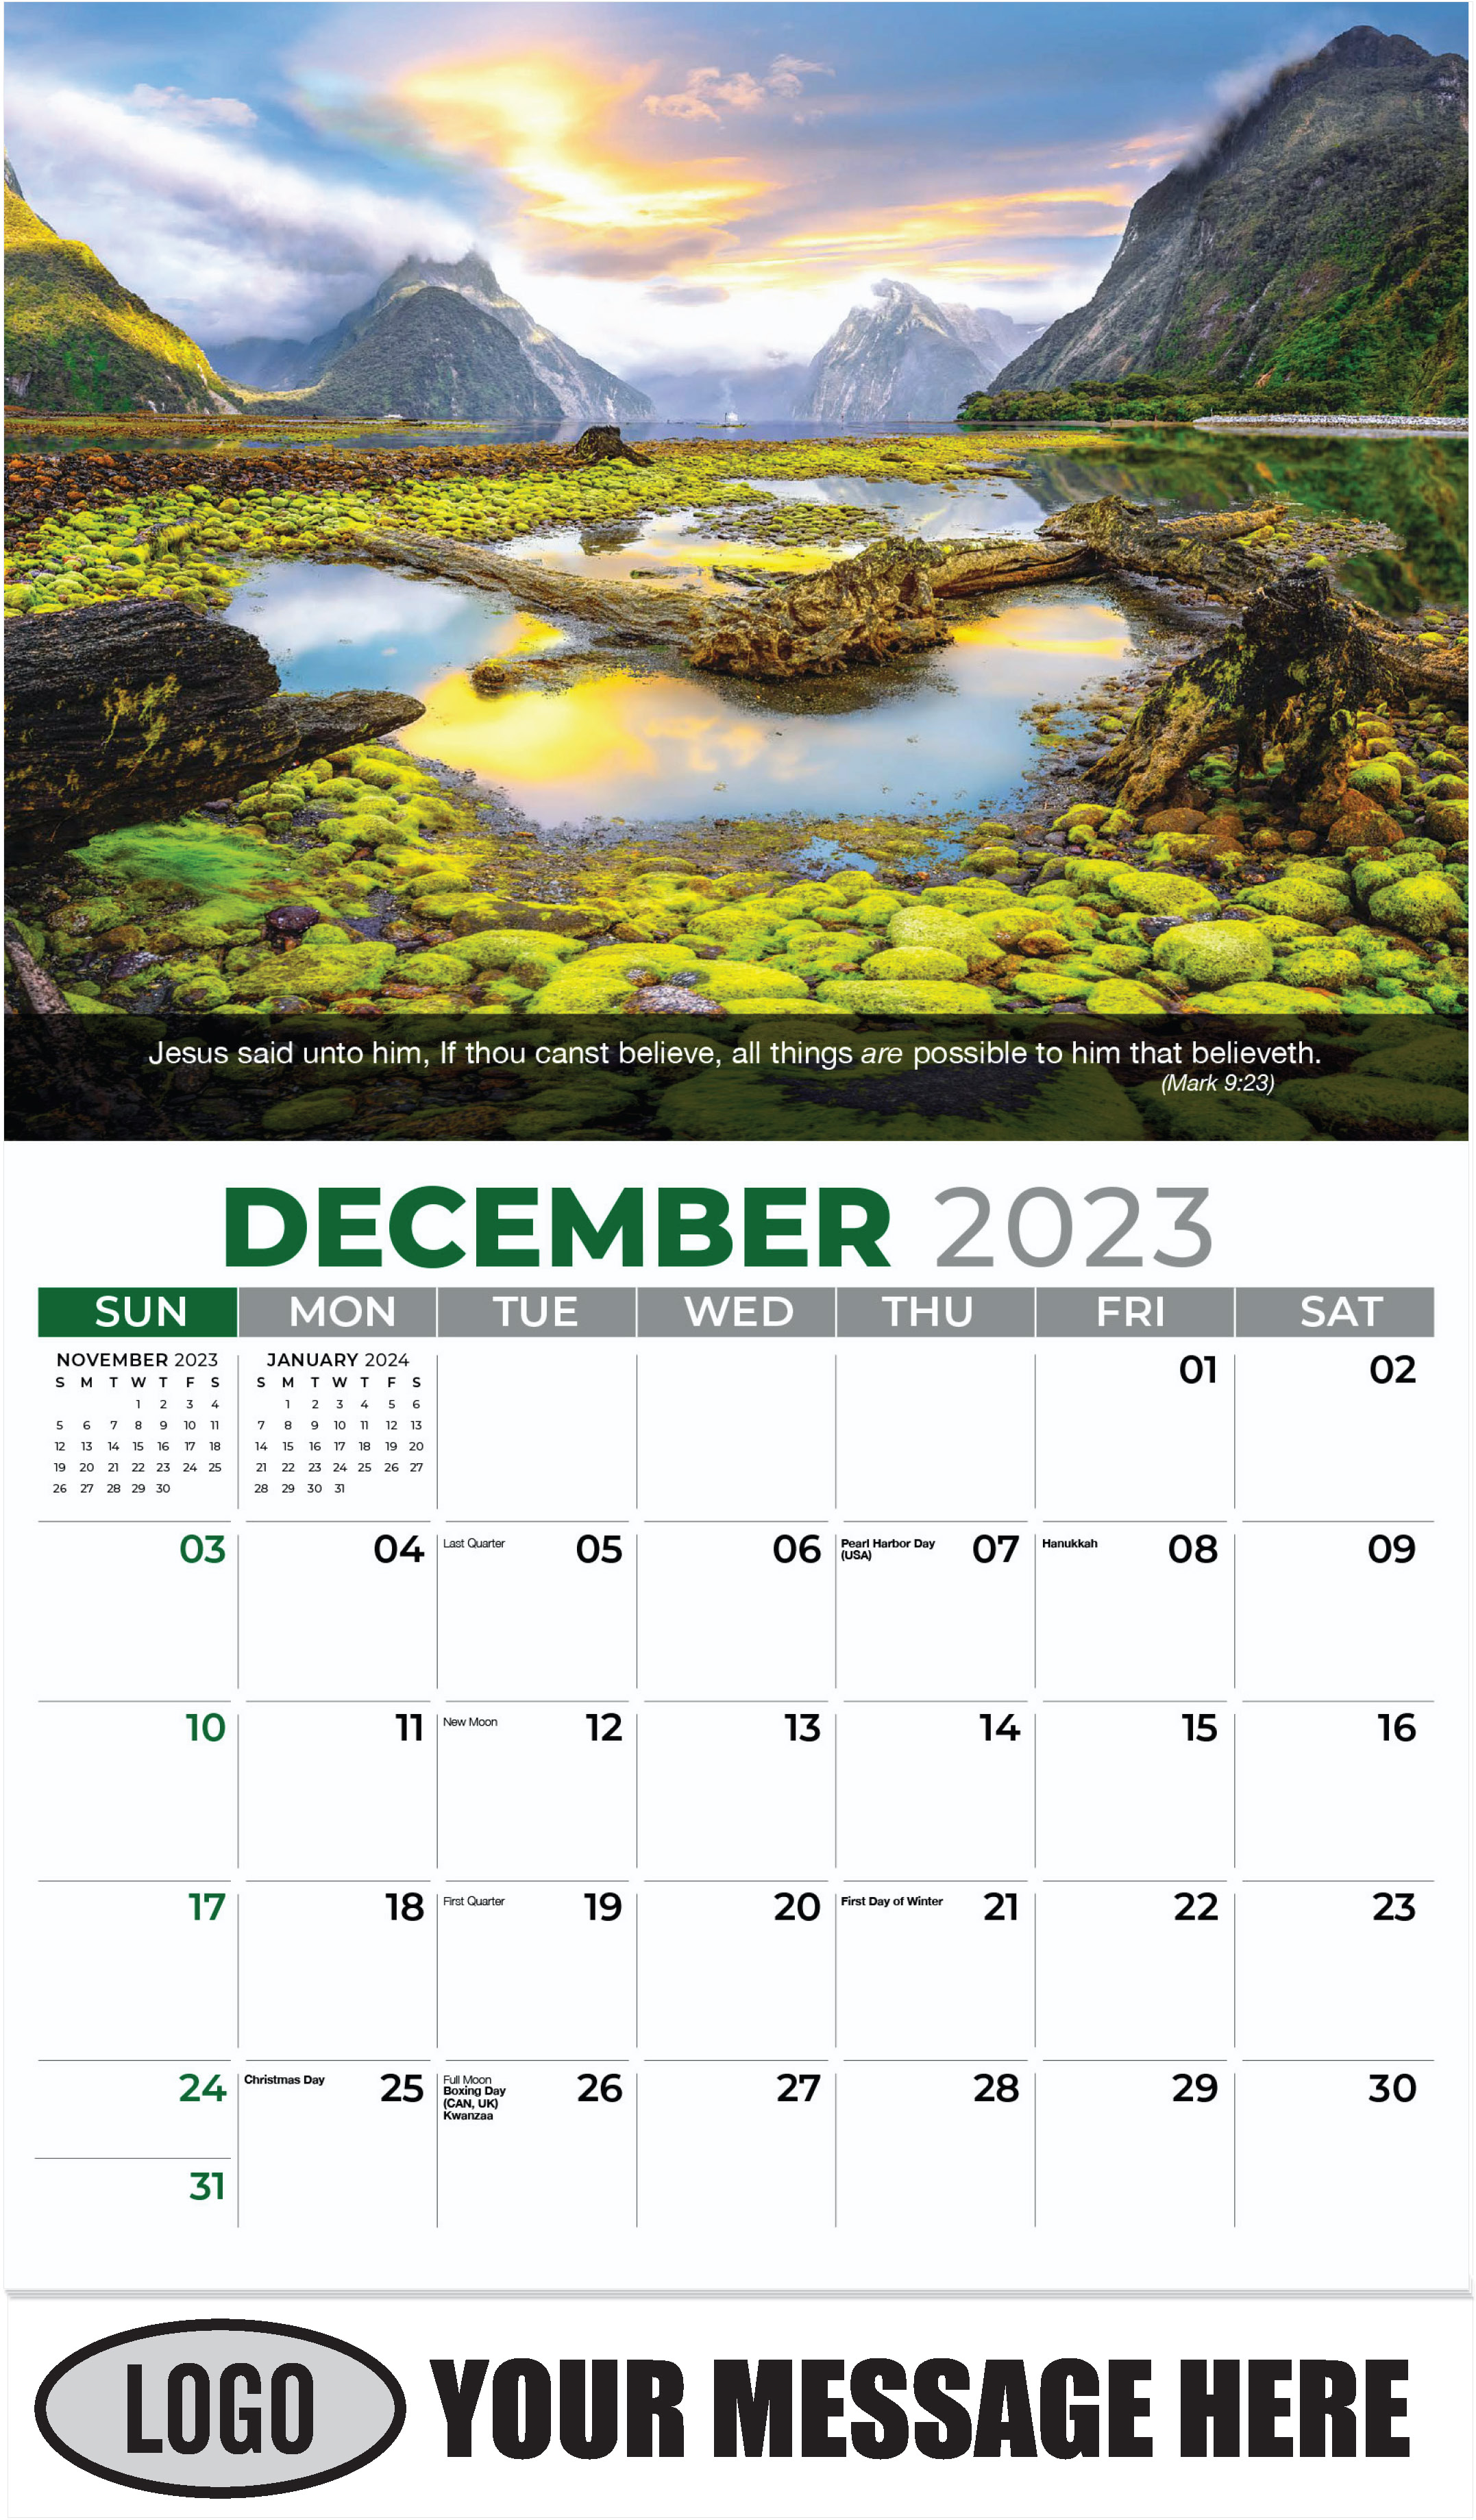 Land of Lord - December 2023 - Faith Passages 2023 Promotional Calendar